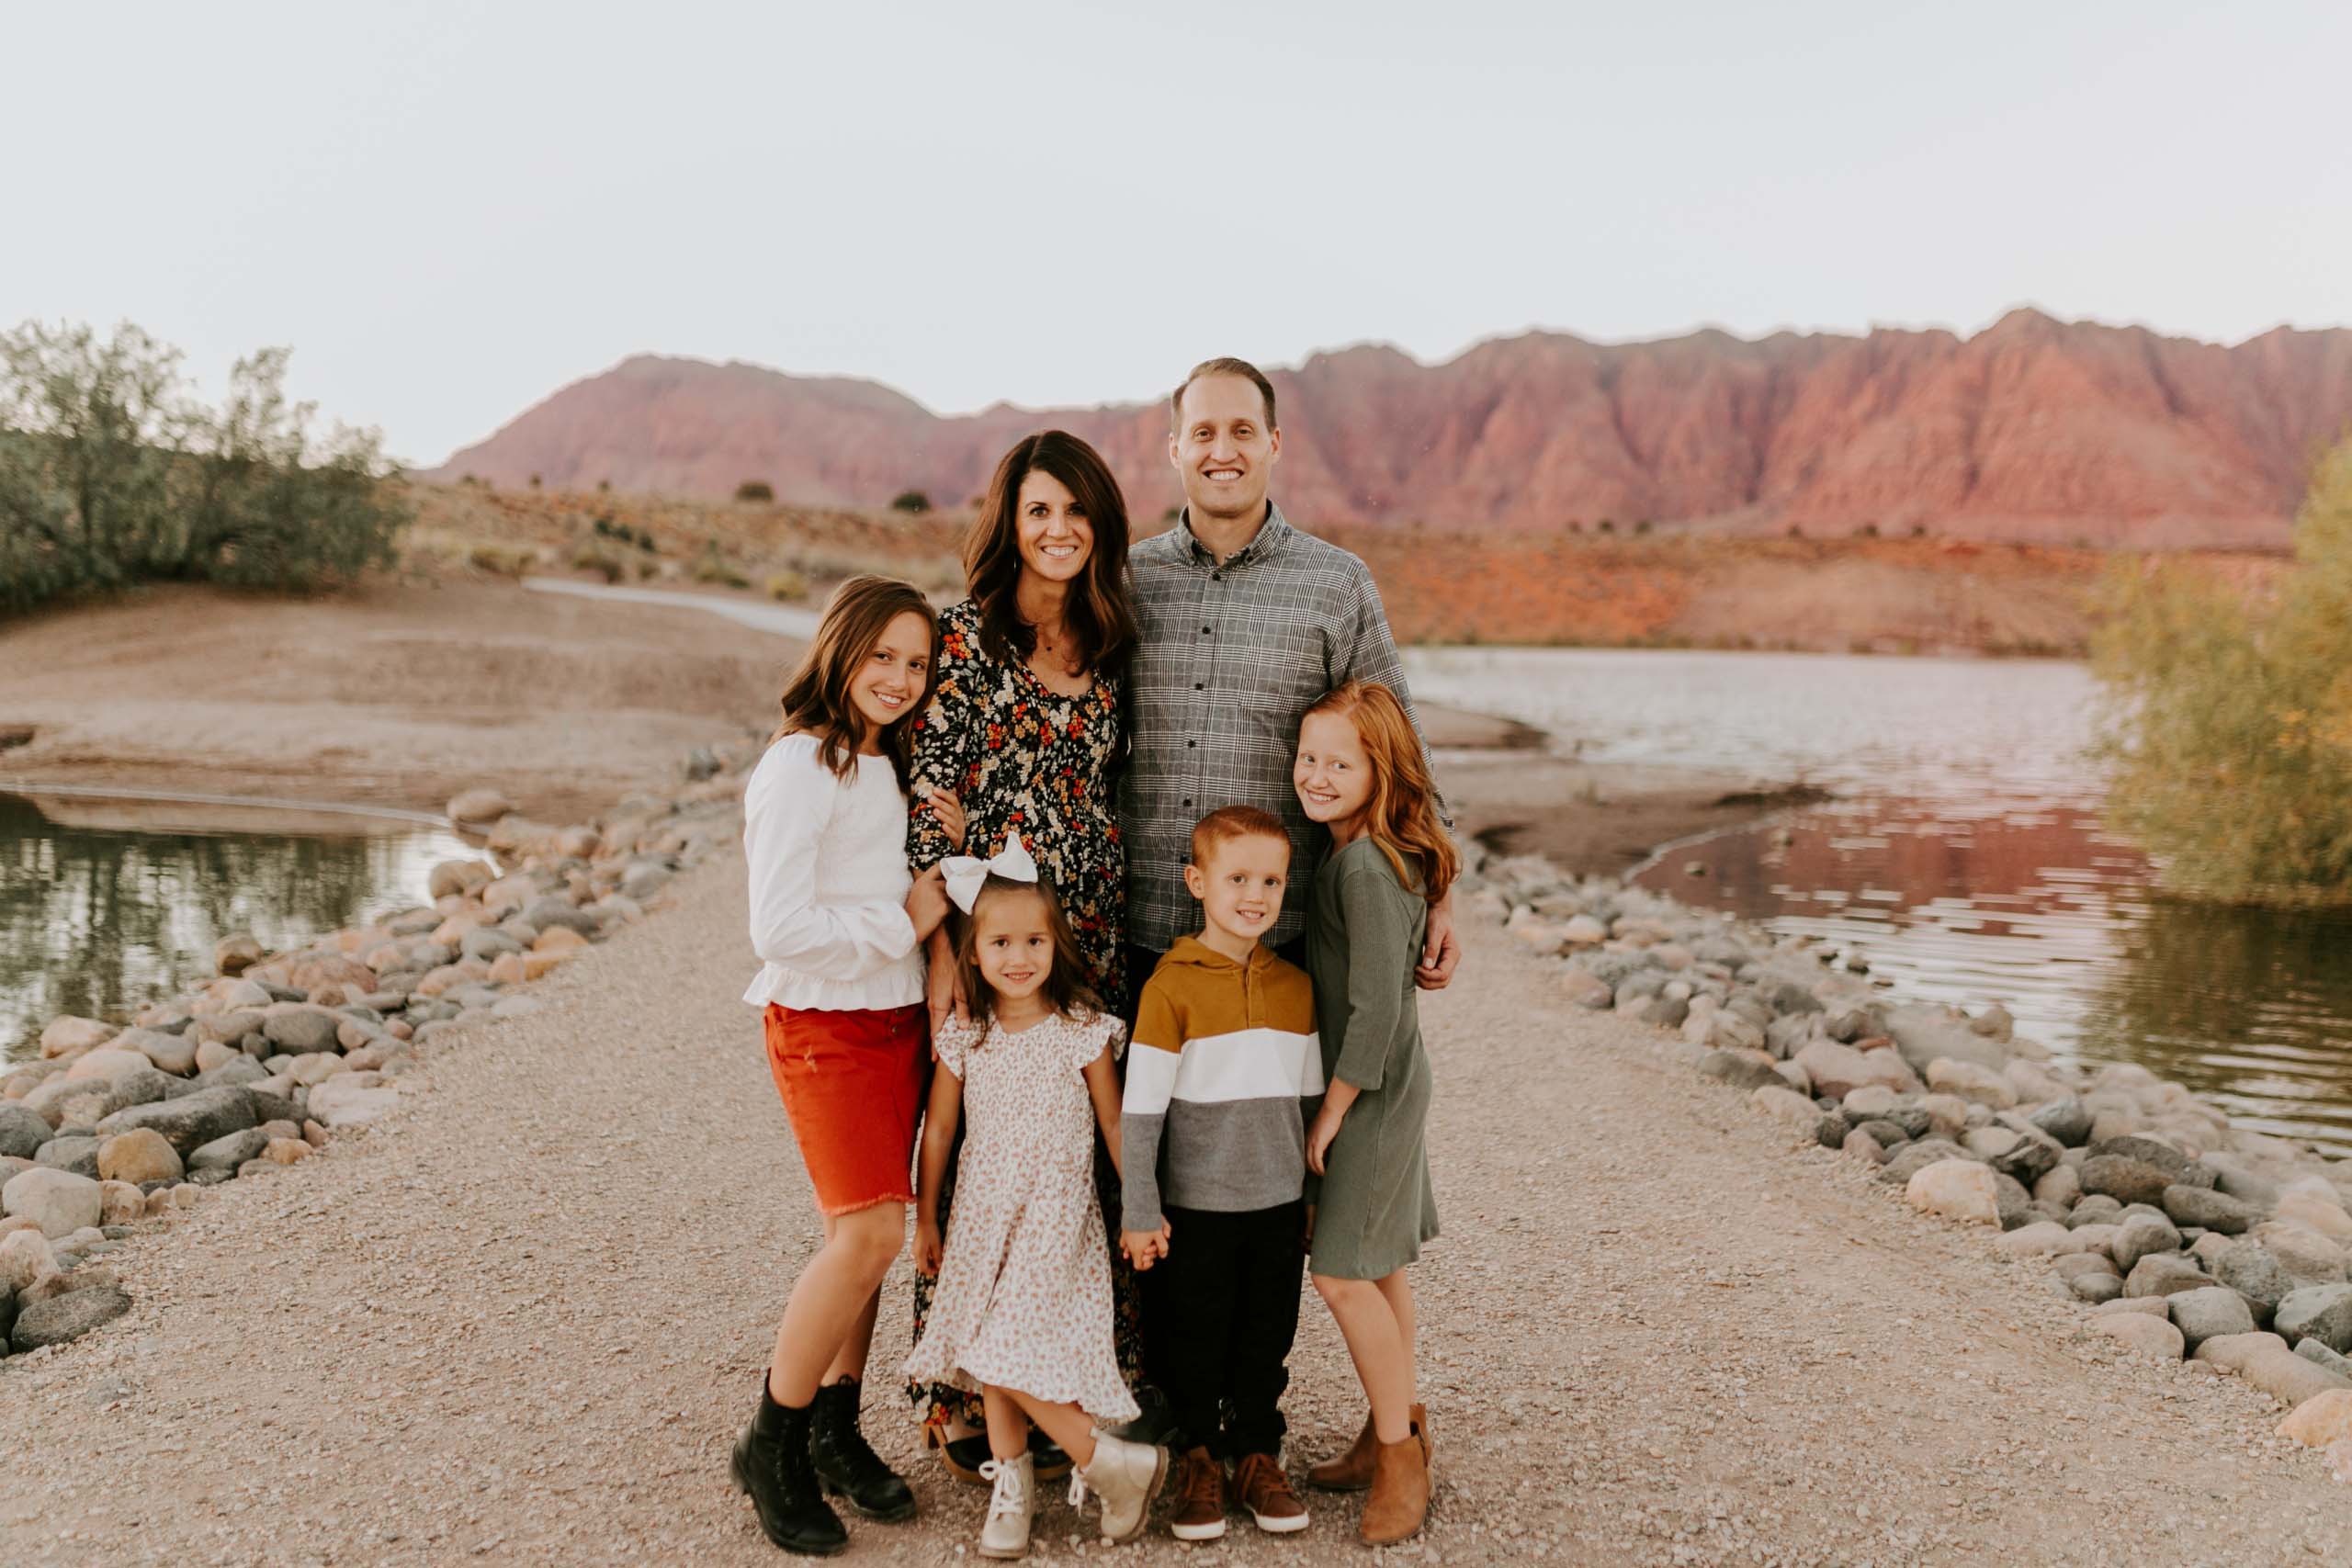 Beckstrom Family photo on gravel path surrounded by lake and red rock mountains.